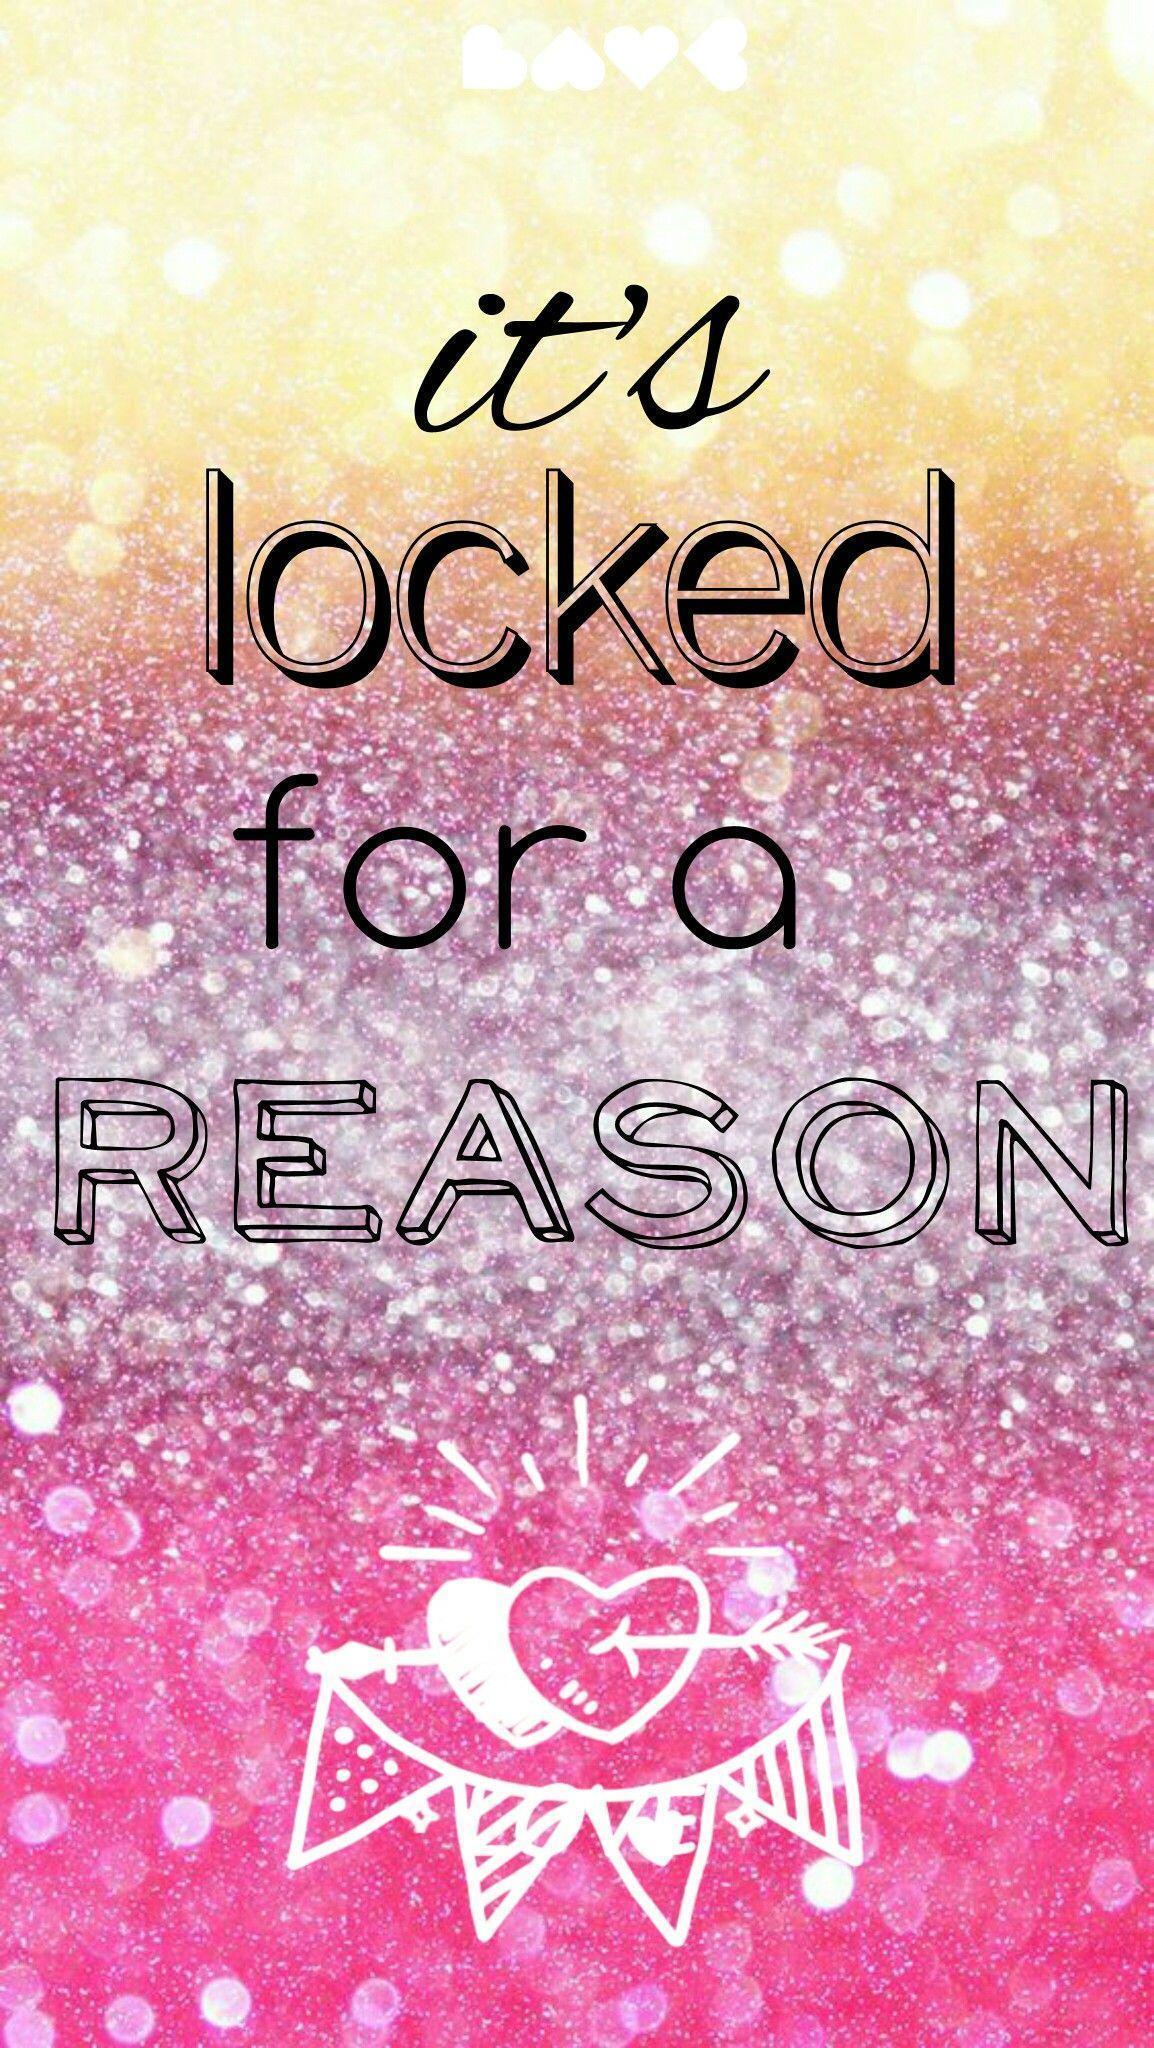 It's Locked for a Reason Wallpaper Free It's Locked for a